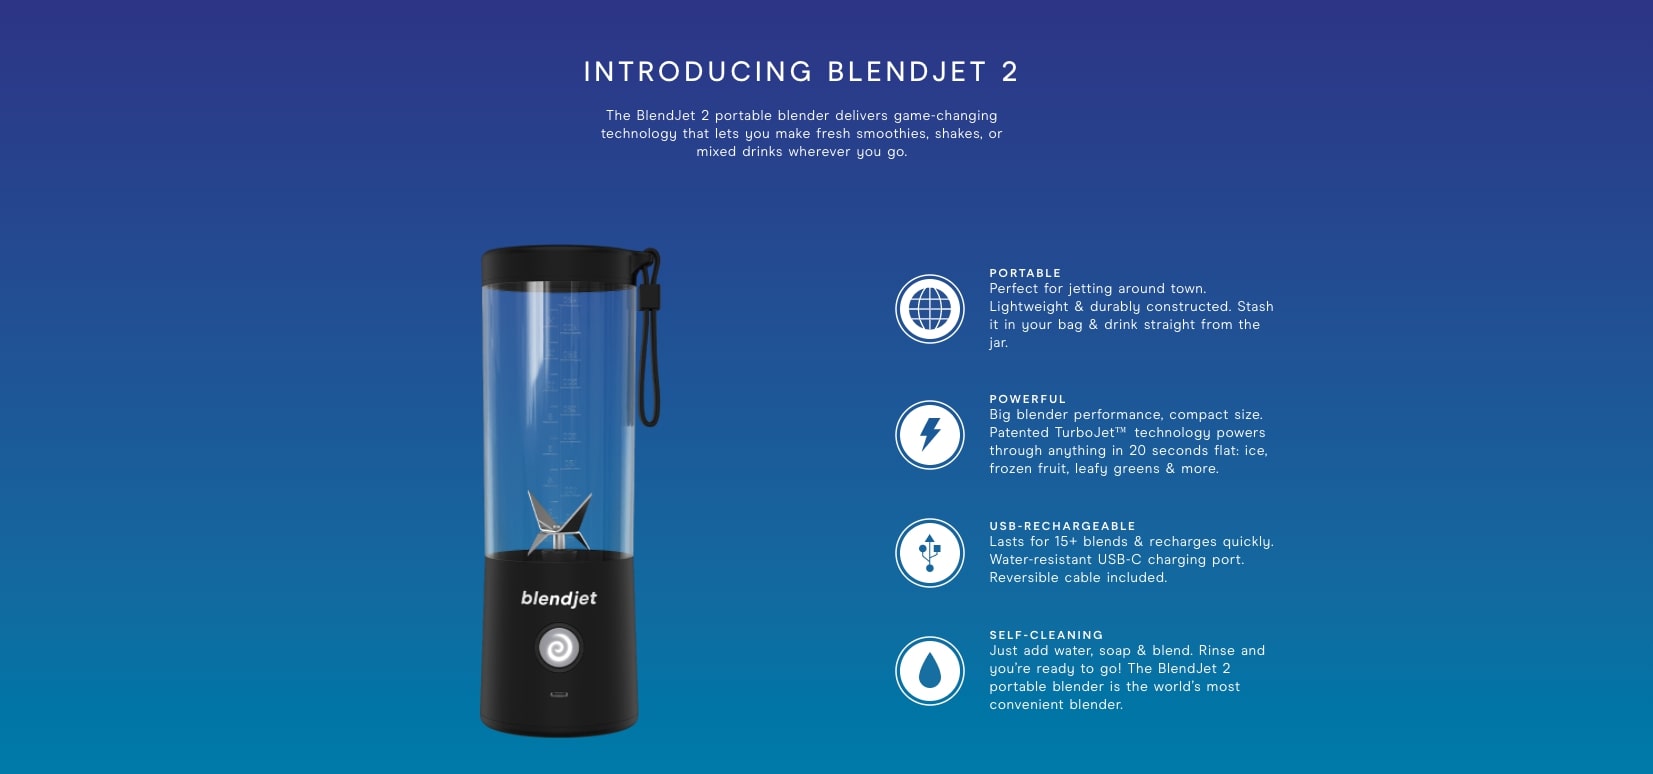 Blendjet's CEO Ryan Pamplin on Building a Fast-Growing Brand with a Purpose